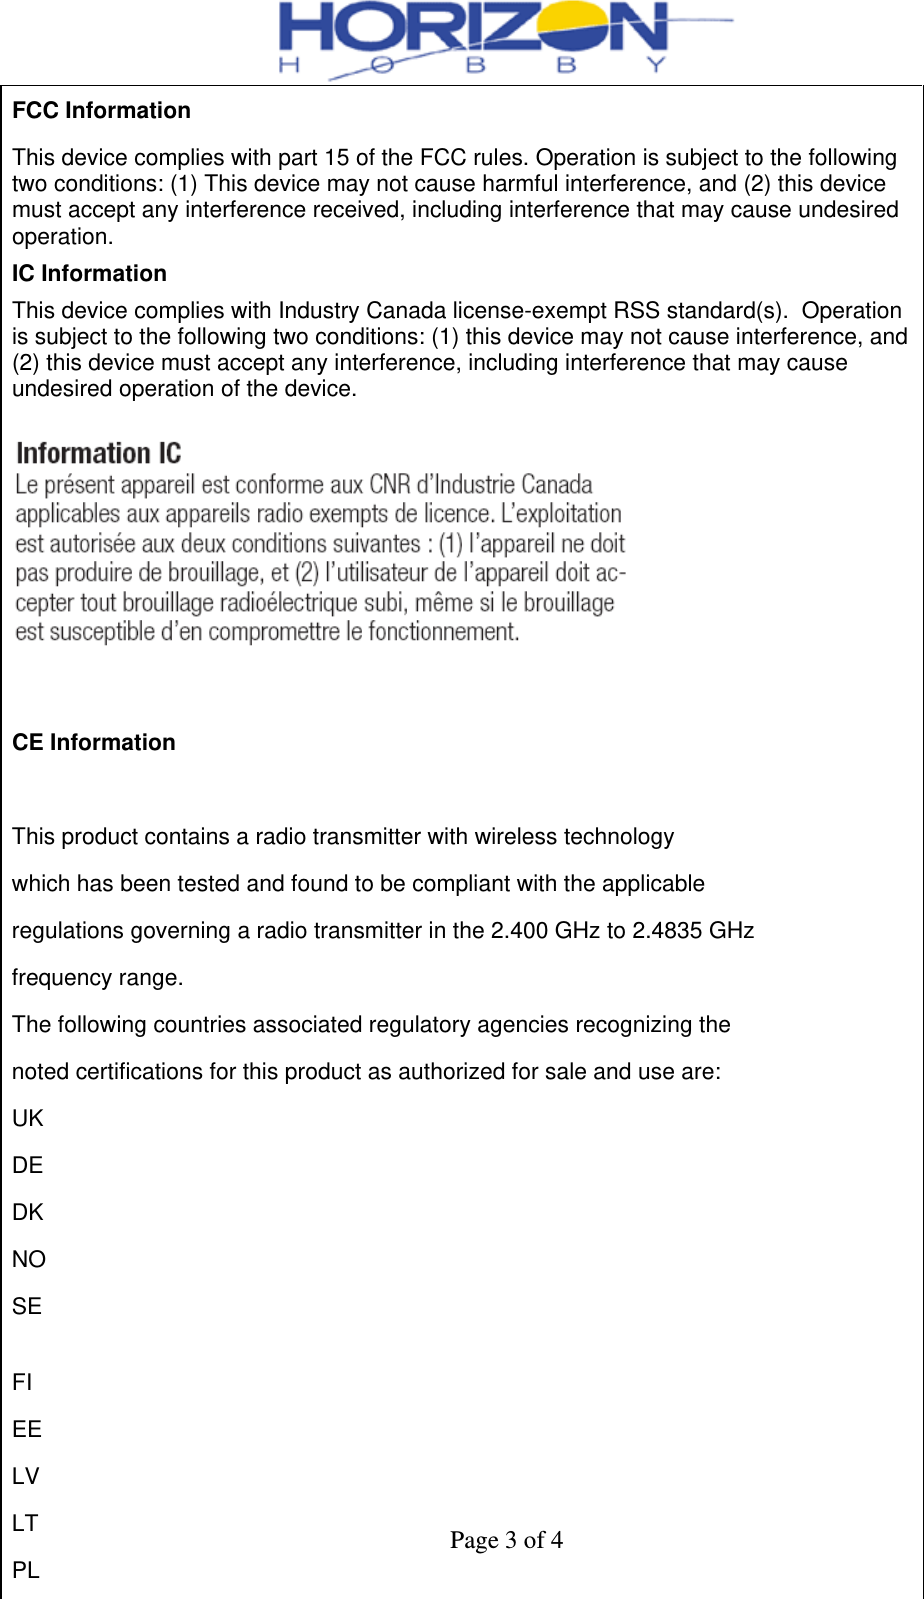  Page 3 of 4 FCC Information This device complies with part 15 of the FCC rules. Operation is subject to the following two conditions: (1) This device may not cause harmful interference, and (2) this device must accept any interference received, including interference that may cause undesired operation. IC Information This device complies with Industry Canada license-exempt RSS standard(s).  Operation is subject to the following two conditions: (1) this device may not cause interference, and (2) this device must accept any interference, including interference that may cause undesired operation of the device.   CE Information   This product contains a radio transmitter with wireless technology which has been tested and found to be compliant with the applicable regulations governing a radio transmitter in the 2.400 GHz to 2.4835 GHz frequency range. The following countries associated regulatory agencies recognizing the noted certifications for this product as authorized for sale and use are: UK DE DK NO SE  FI EE LV LT PL 